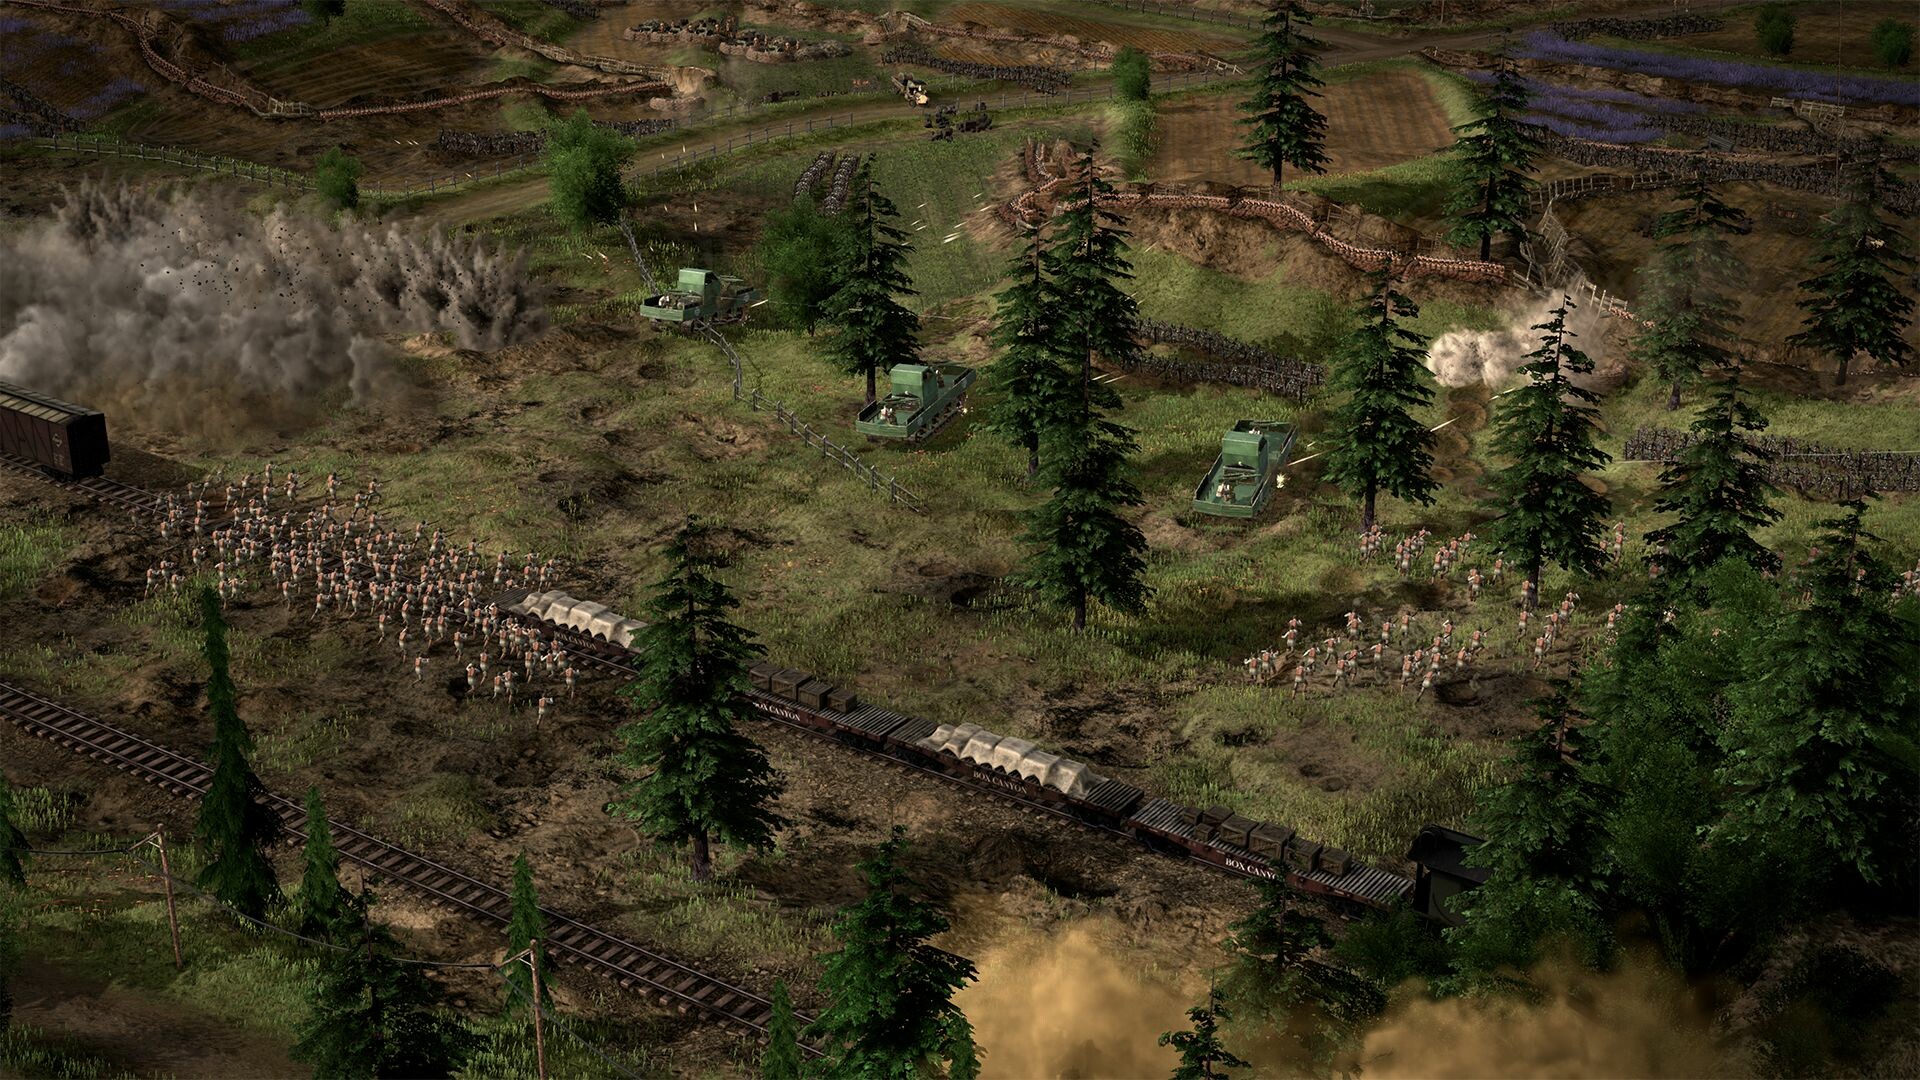 Infantry advance across a colorful grassy landscape as they cross a railroad line while puffs of dirty smoke indicate artillery falling nearby.